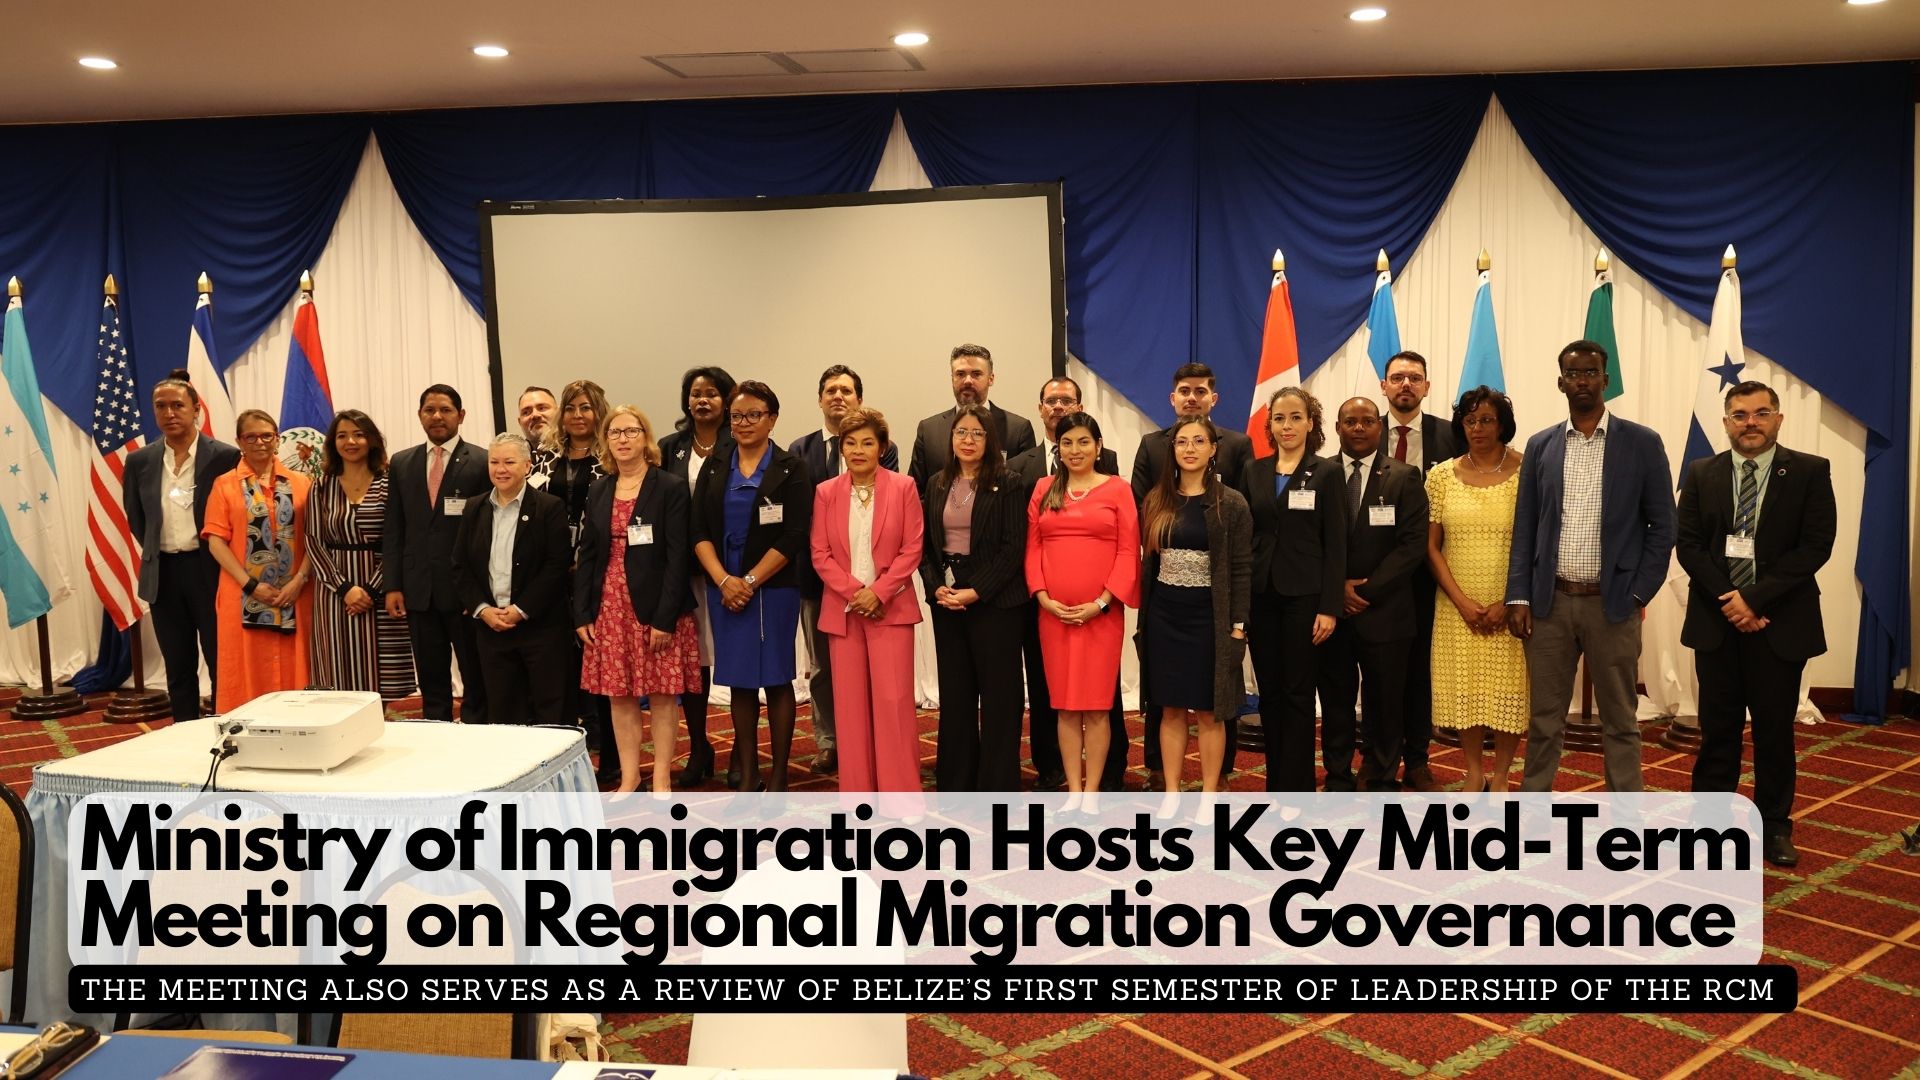 Ministry of Immigration Hosts Key Mid-Term Meeting on Regional Migration Governance